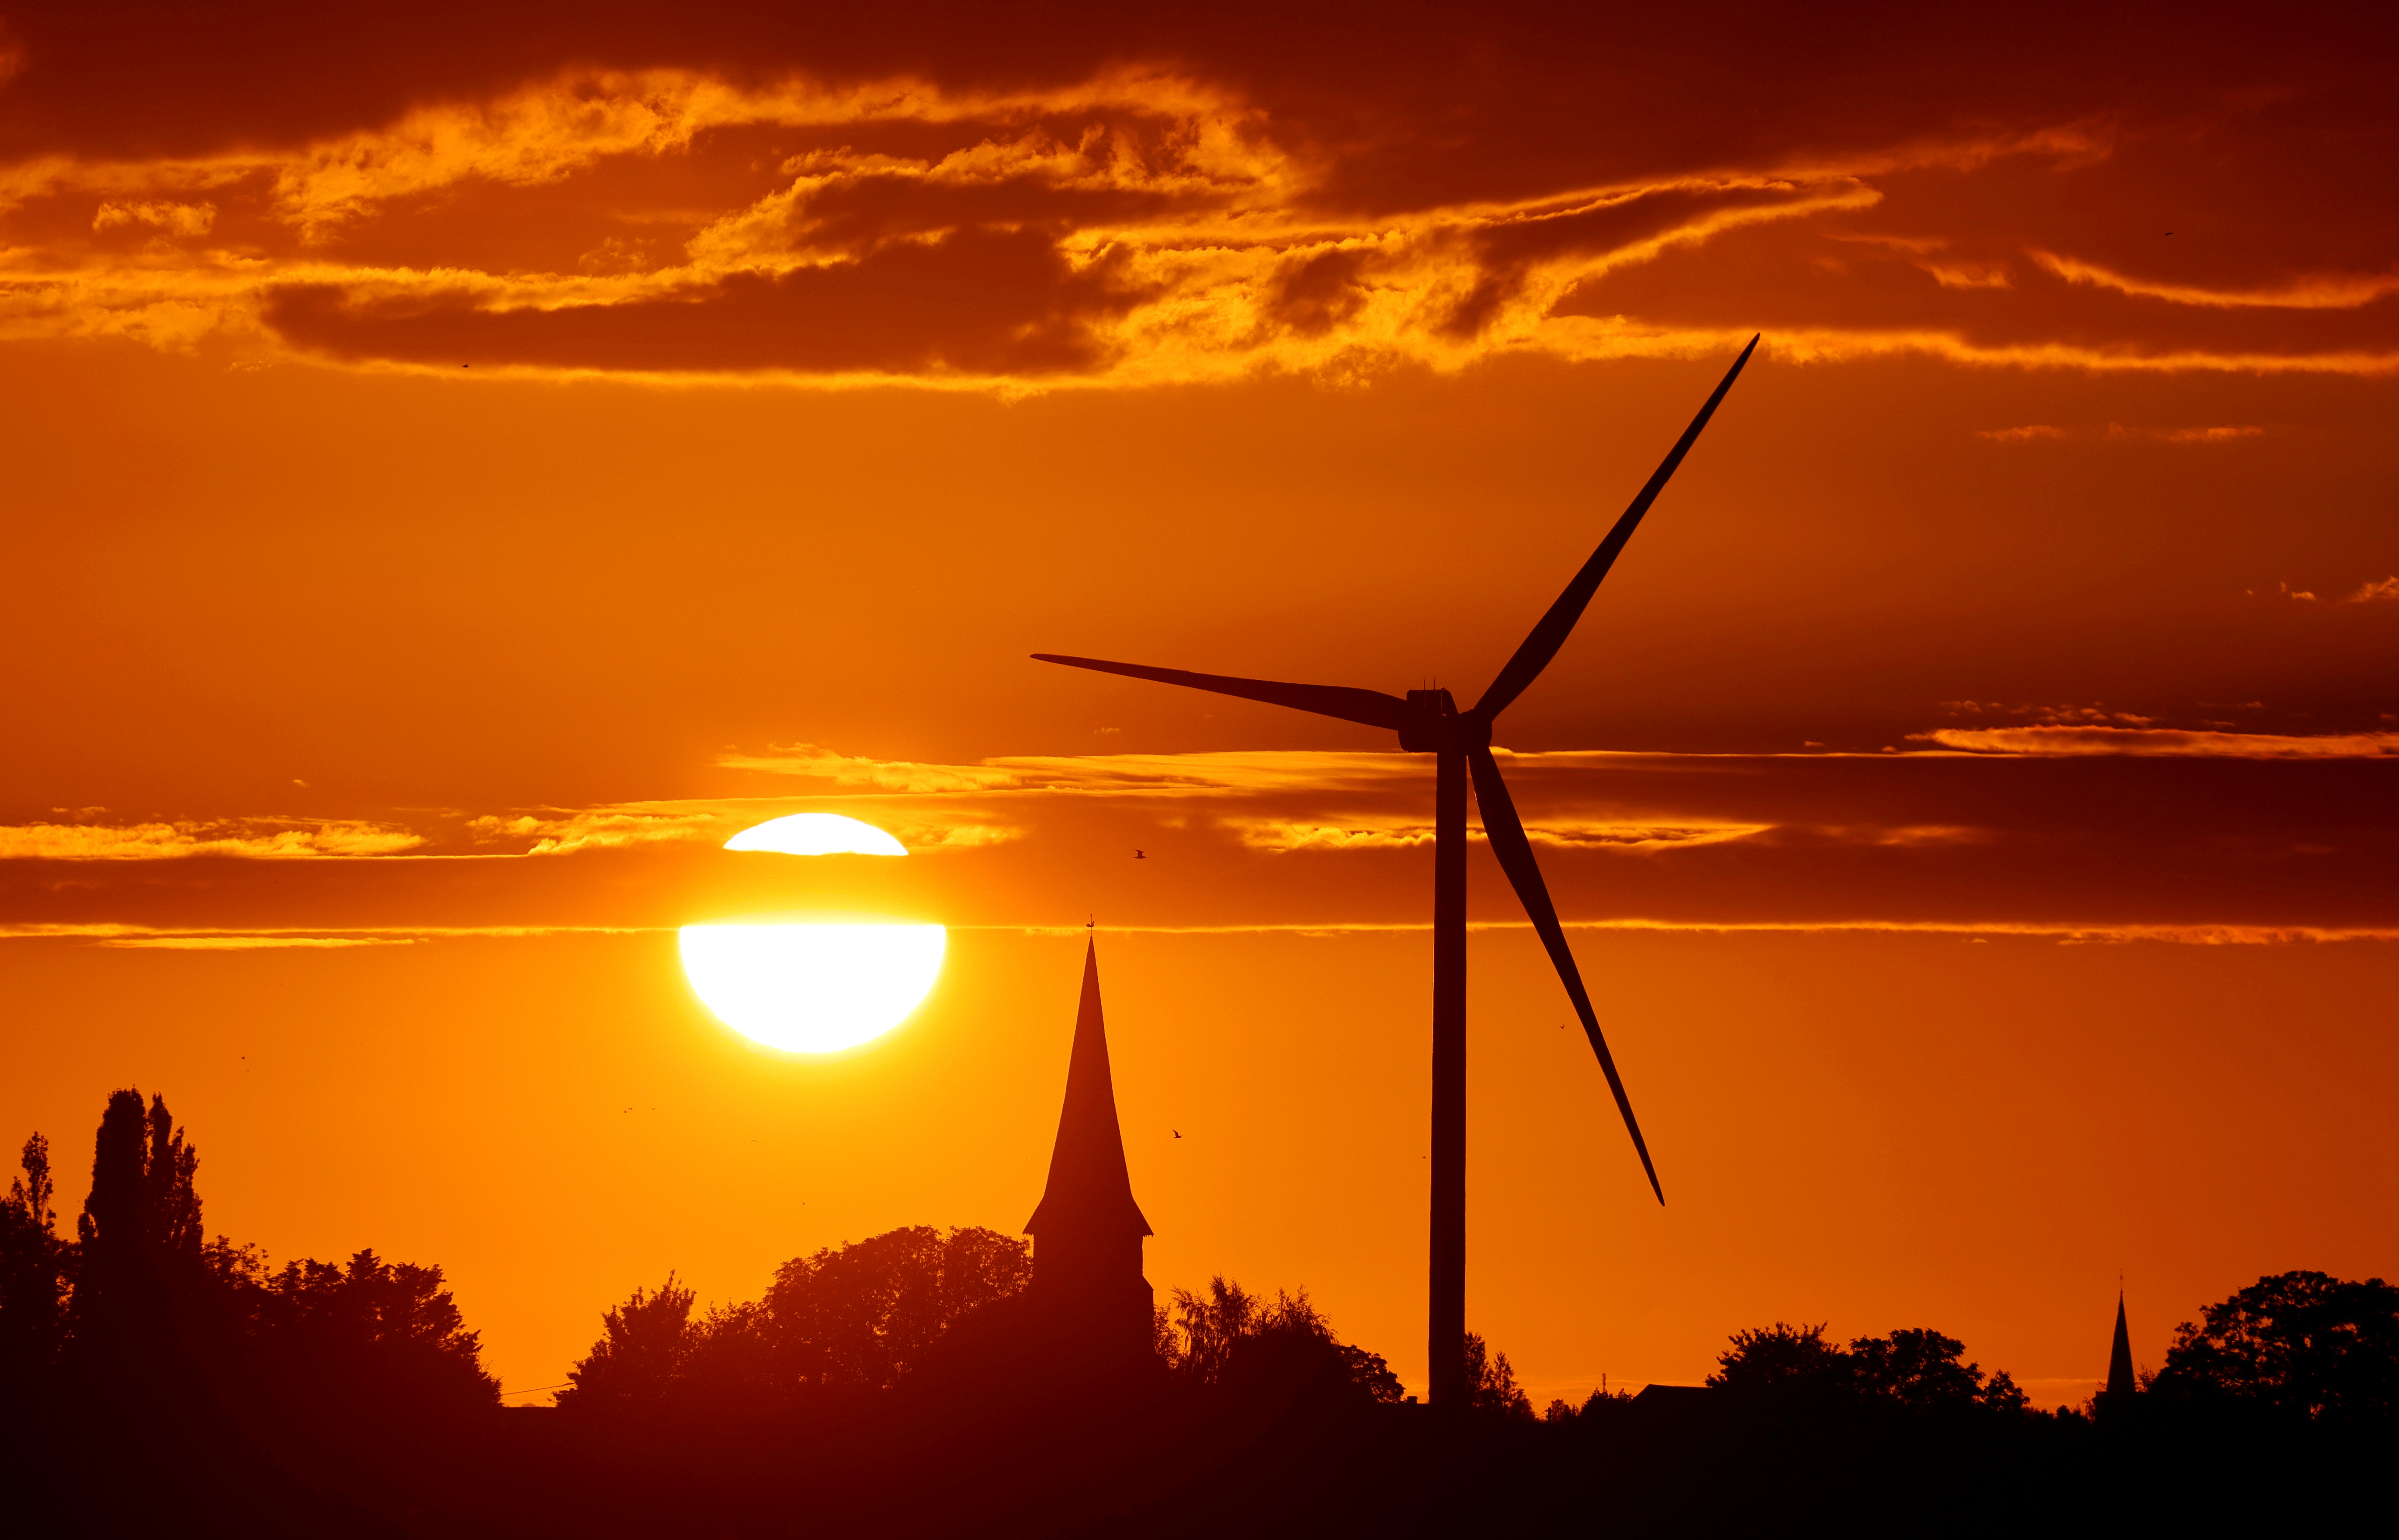 A power-generating windmill turbine is pictured during sunset at a renewable energy park in Ecoust-Saint-Mein, France